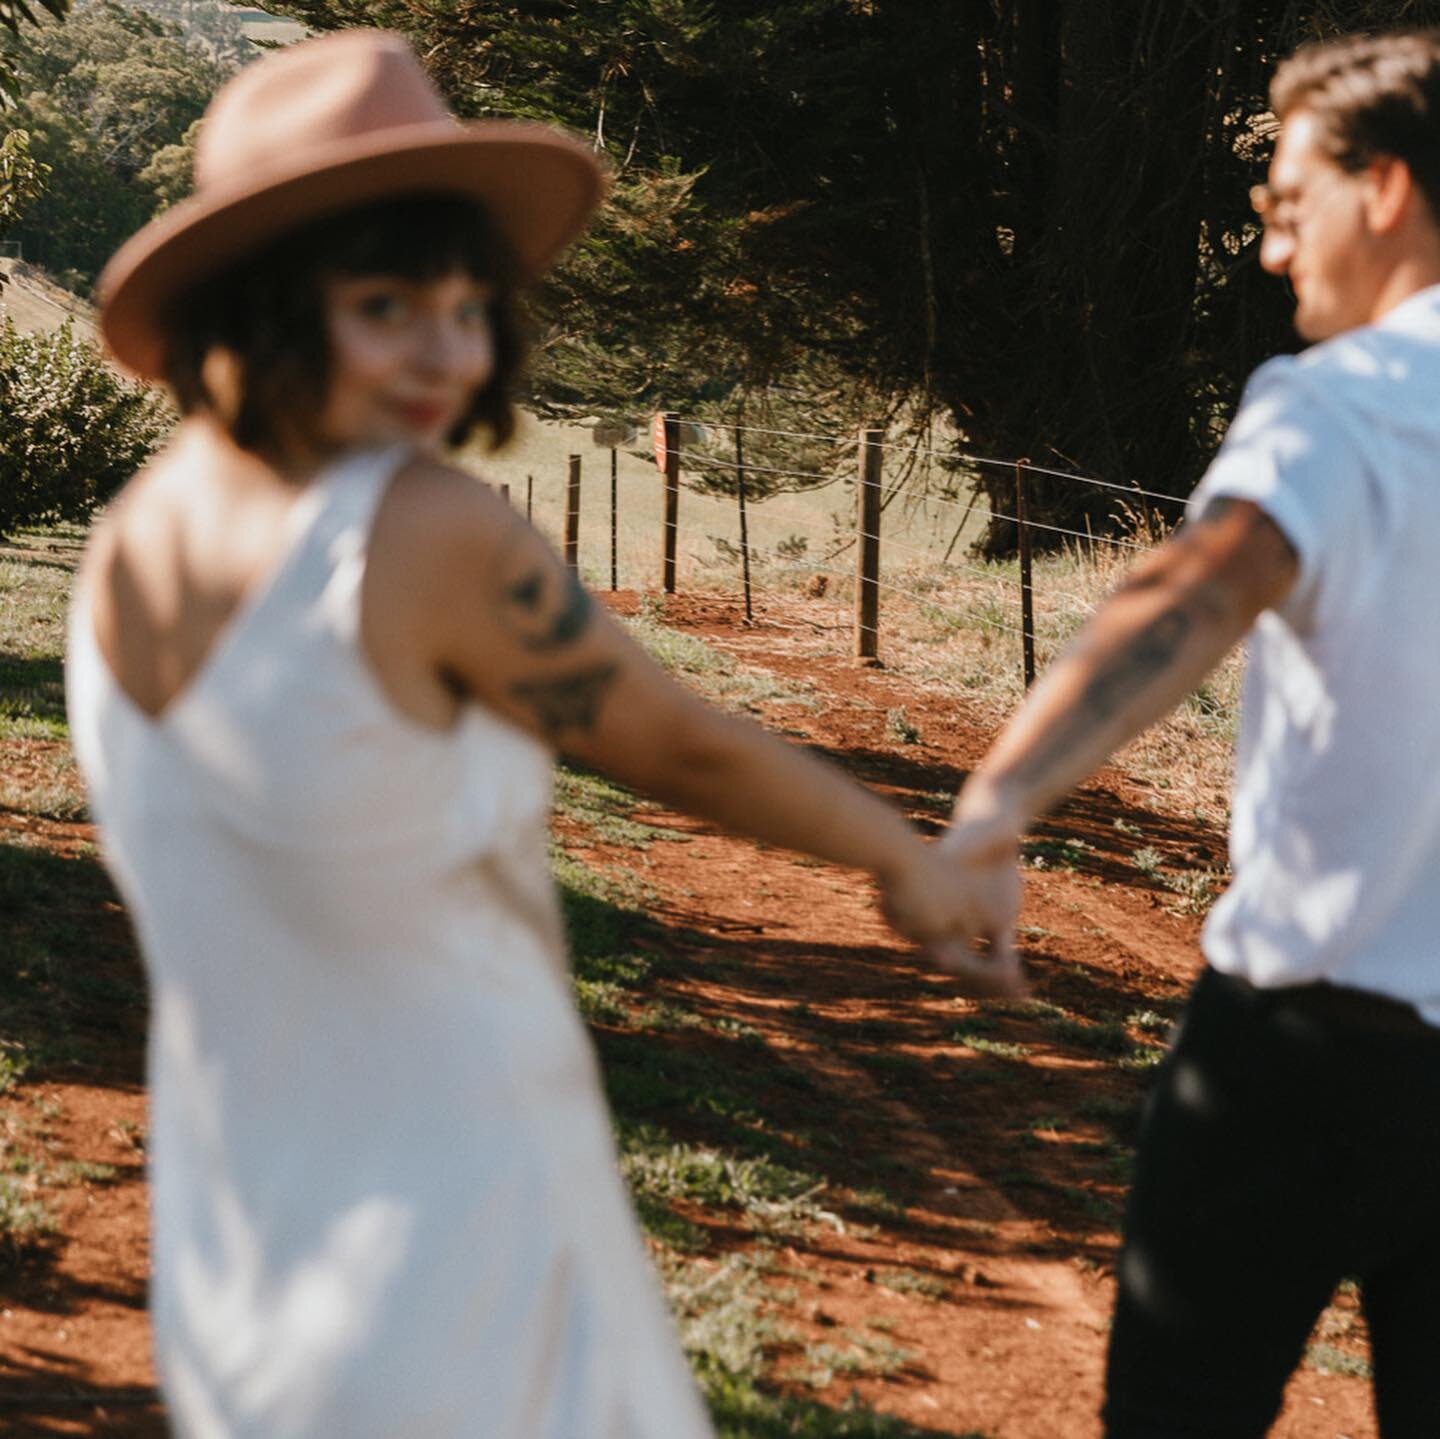 Who would&rsquo;ve thought spending the afternoon running around a cherry orchard could be so much fun? 🍒✨ 

Alex + Amber at @cherryhill_orchards, featured on @polkadotwedding ❤️ 
Shoot collaboration with @yasithaphoto.